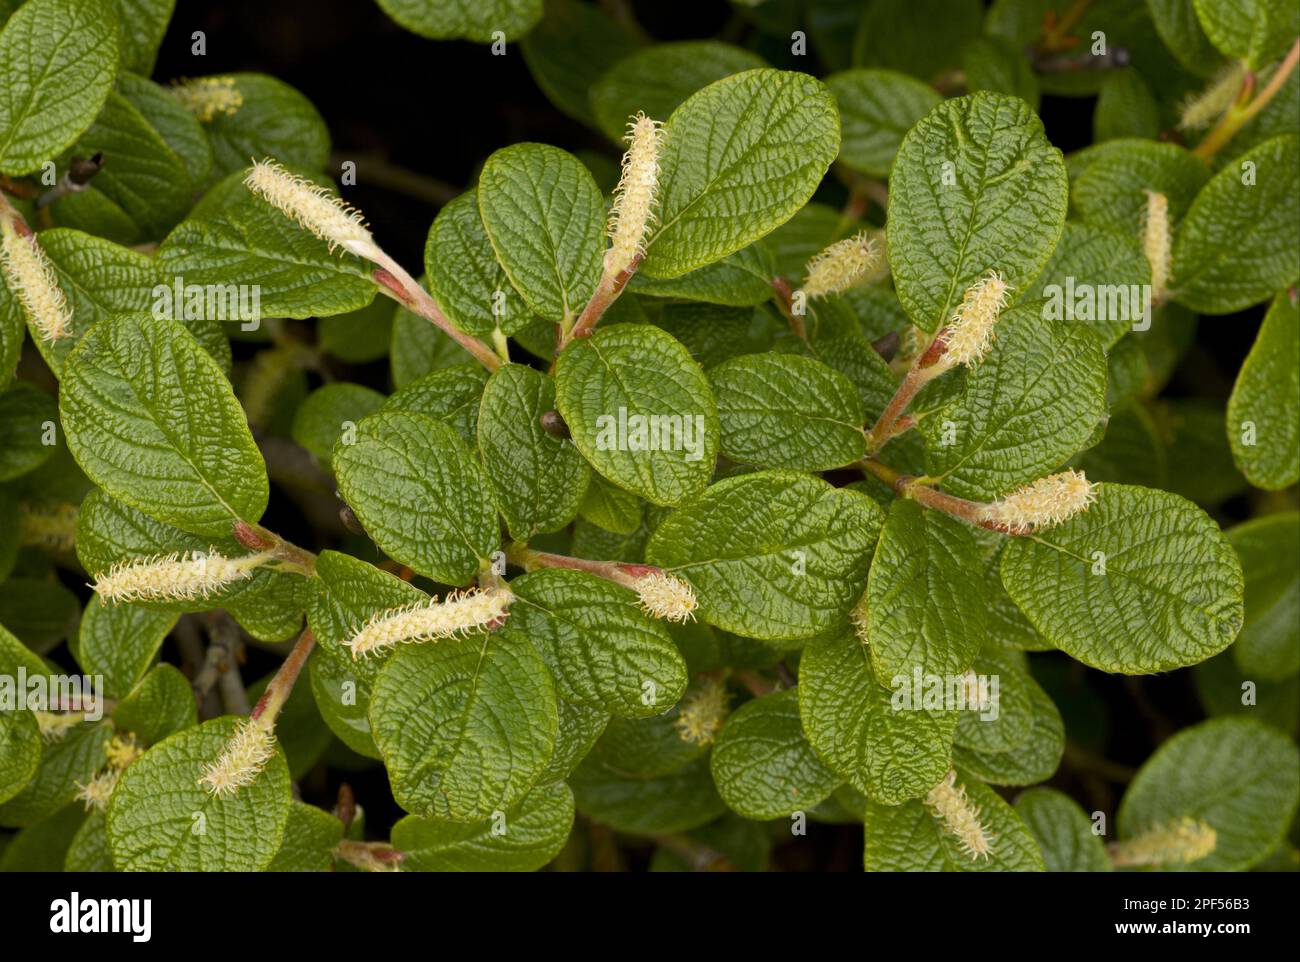 Net-leaved willow (Salix reticulata), Willow family, Net-leaved willow catkins and leaves, Rocky Mountains, Canada Stock Photo